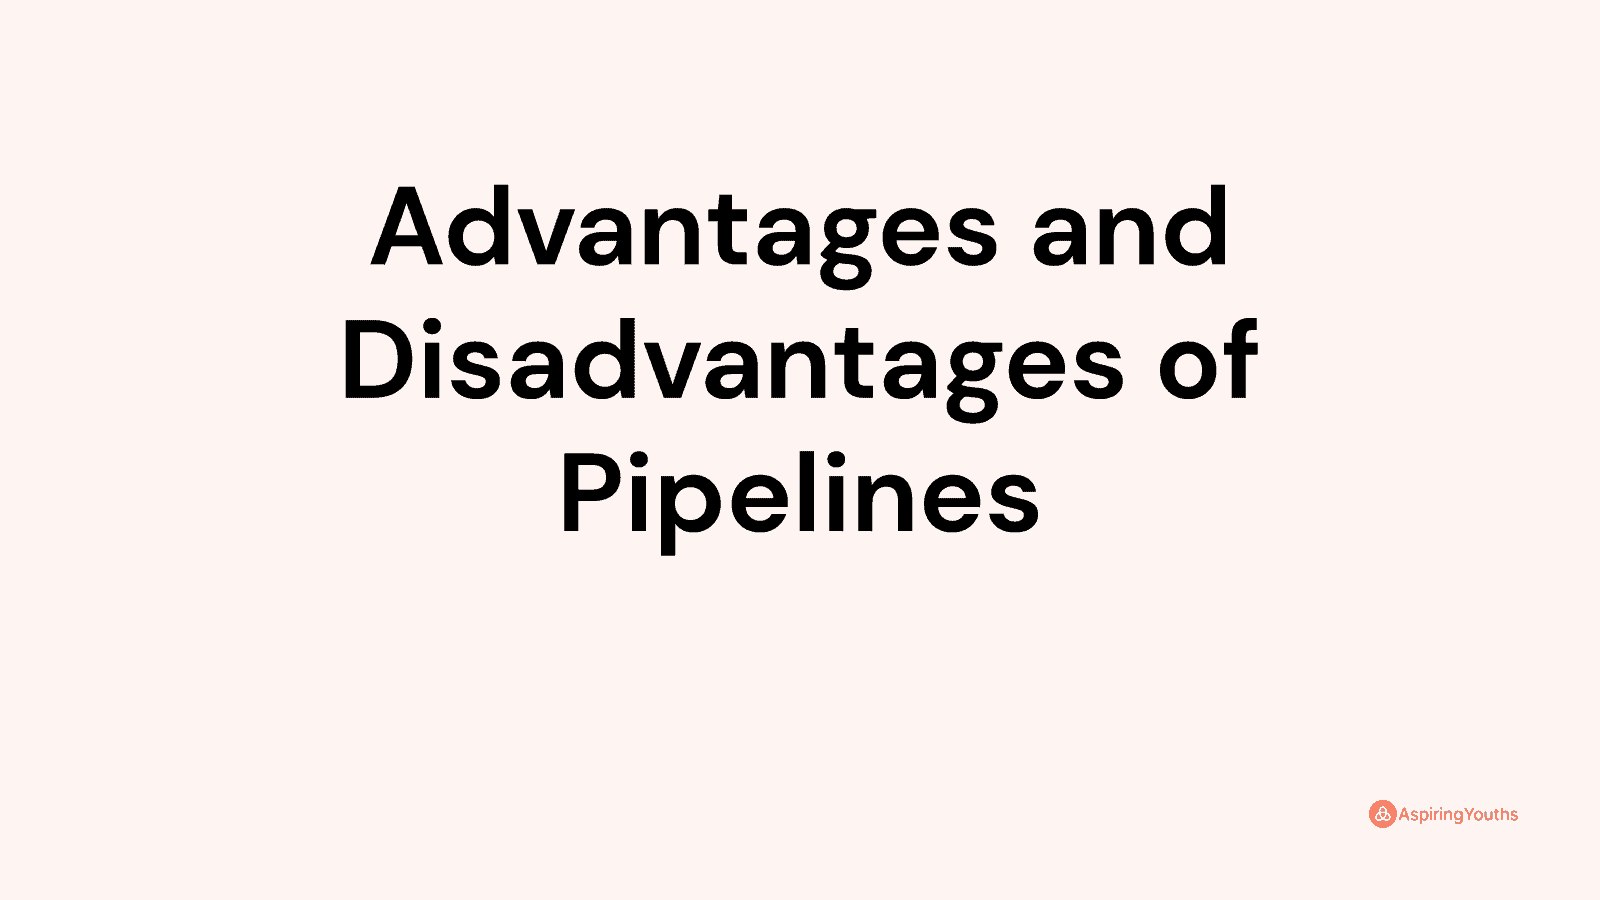 Advantages and disadvantages of Pipelines